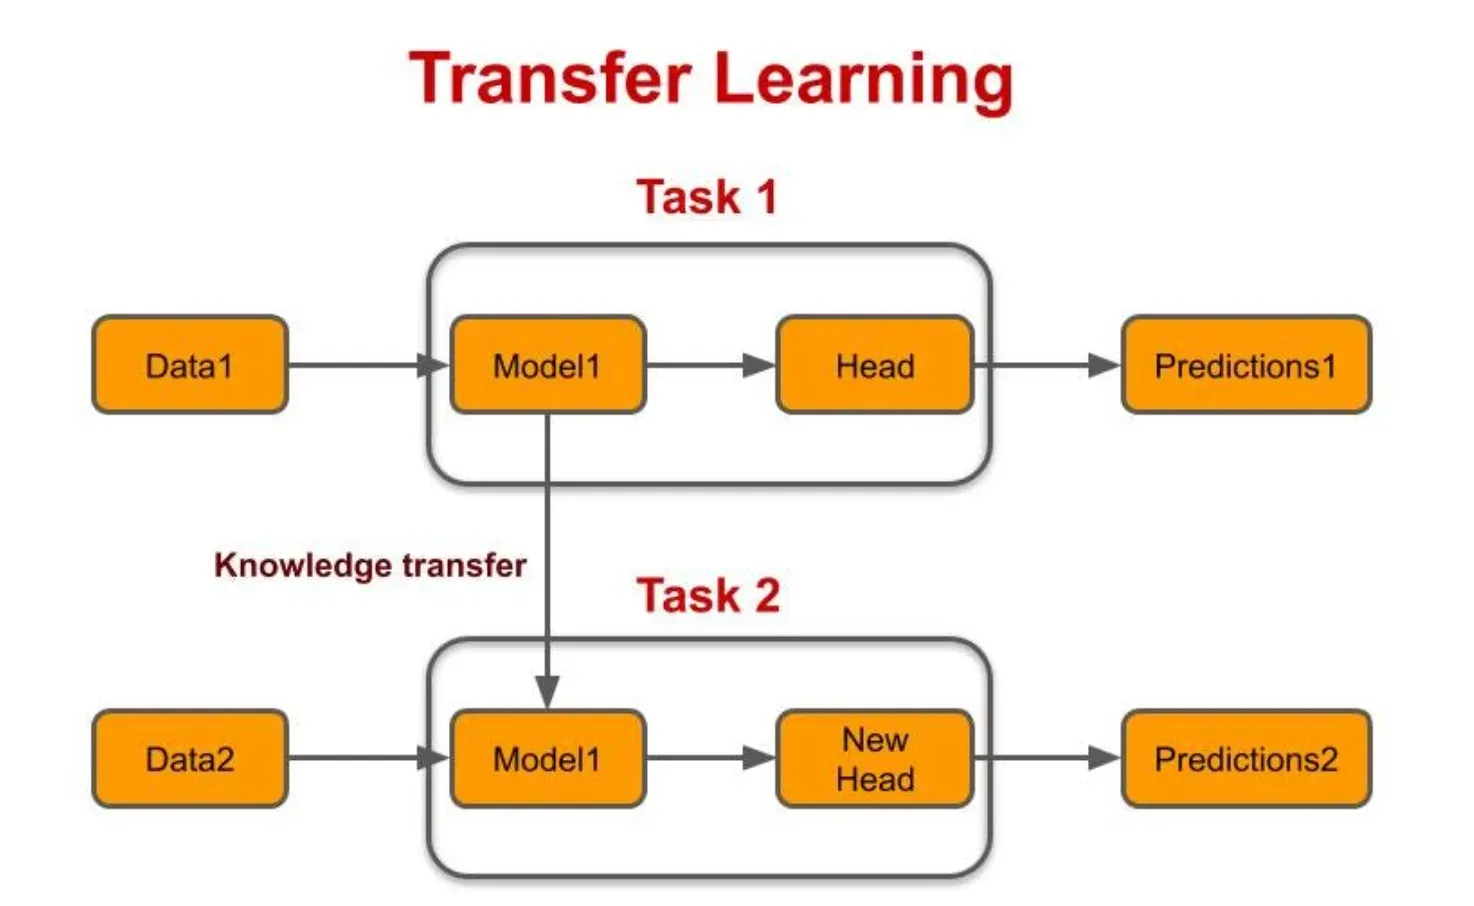 The Process of Transfer Learning